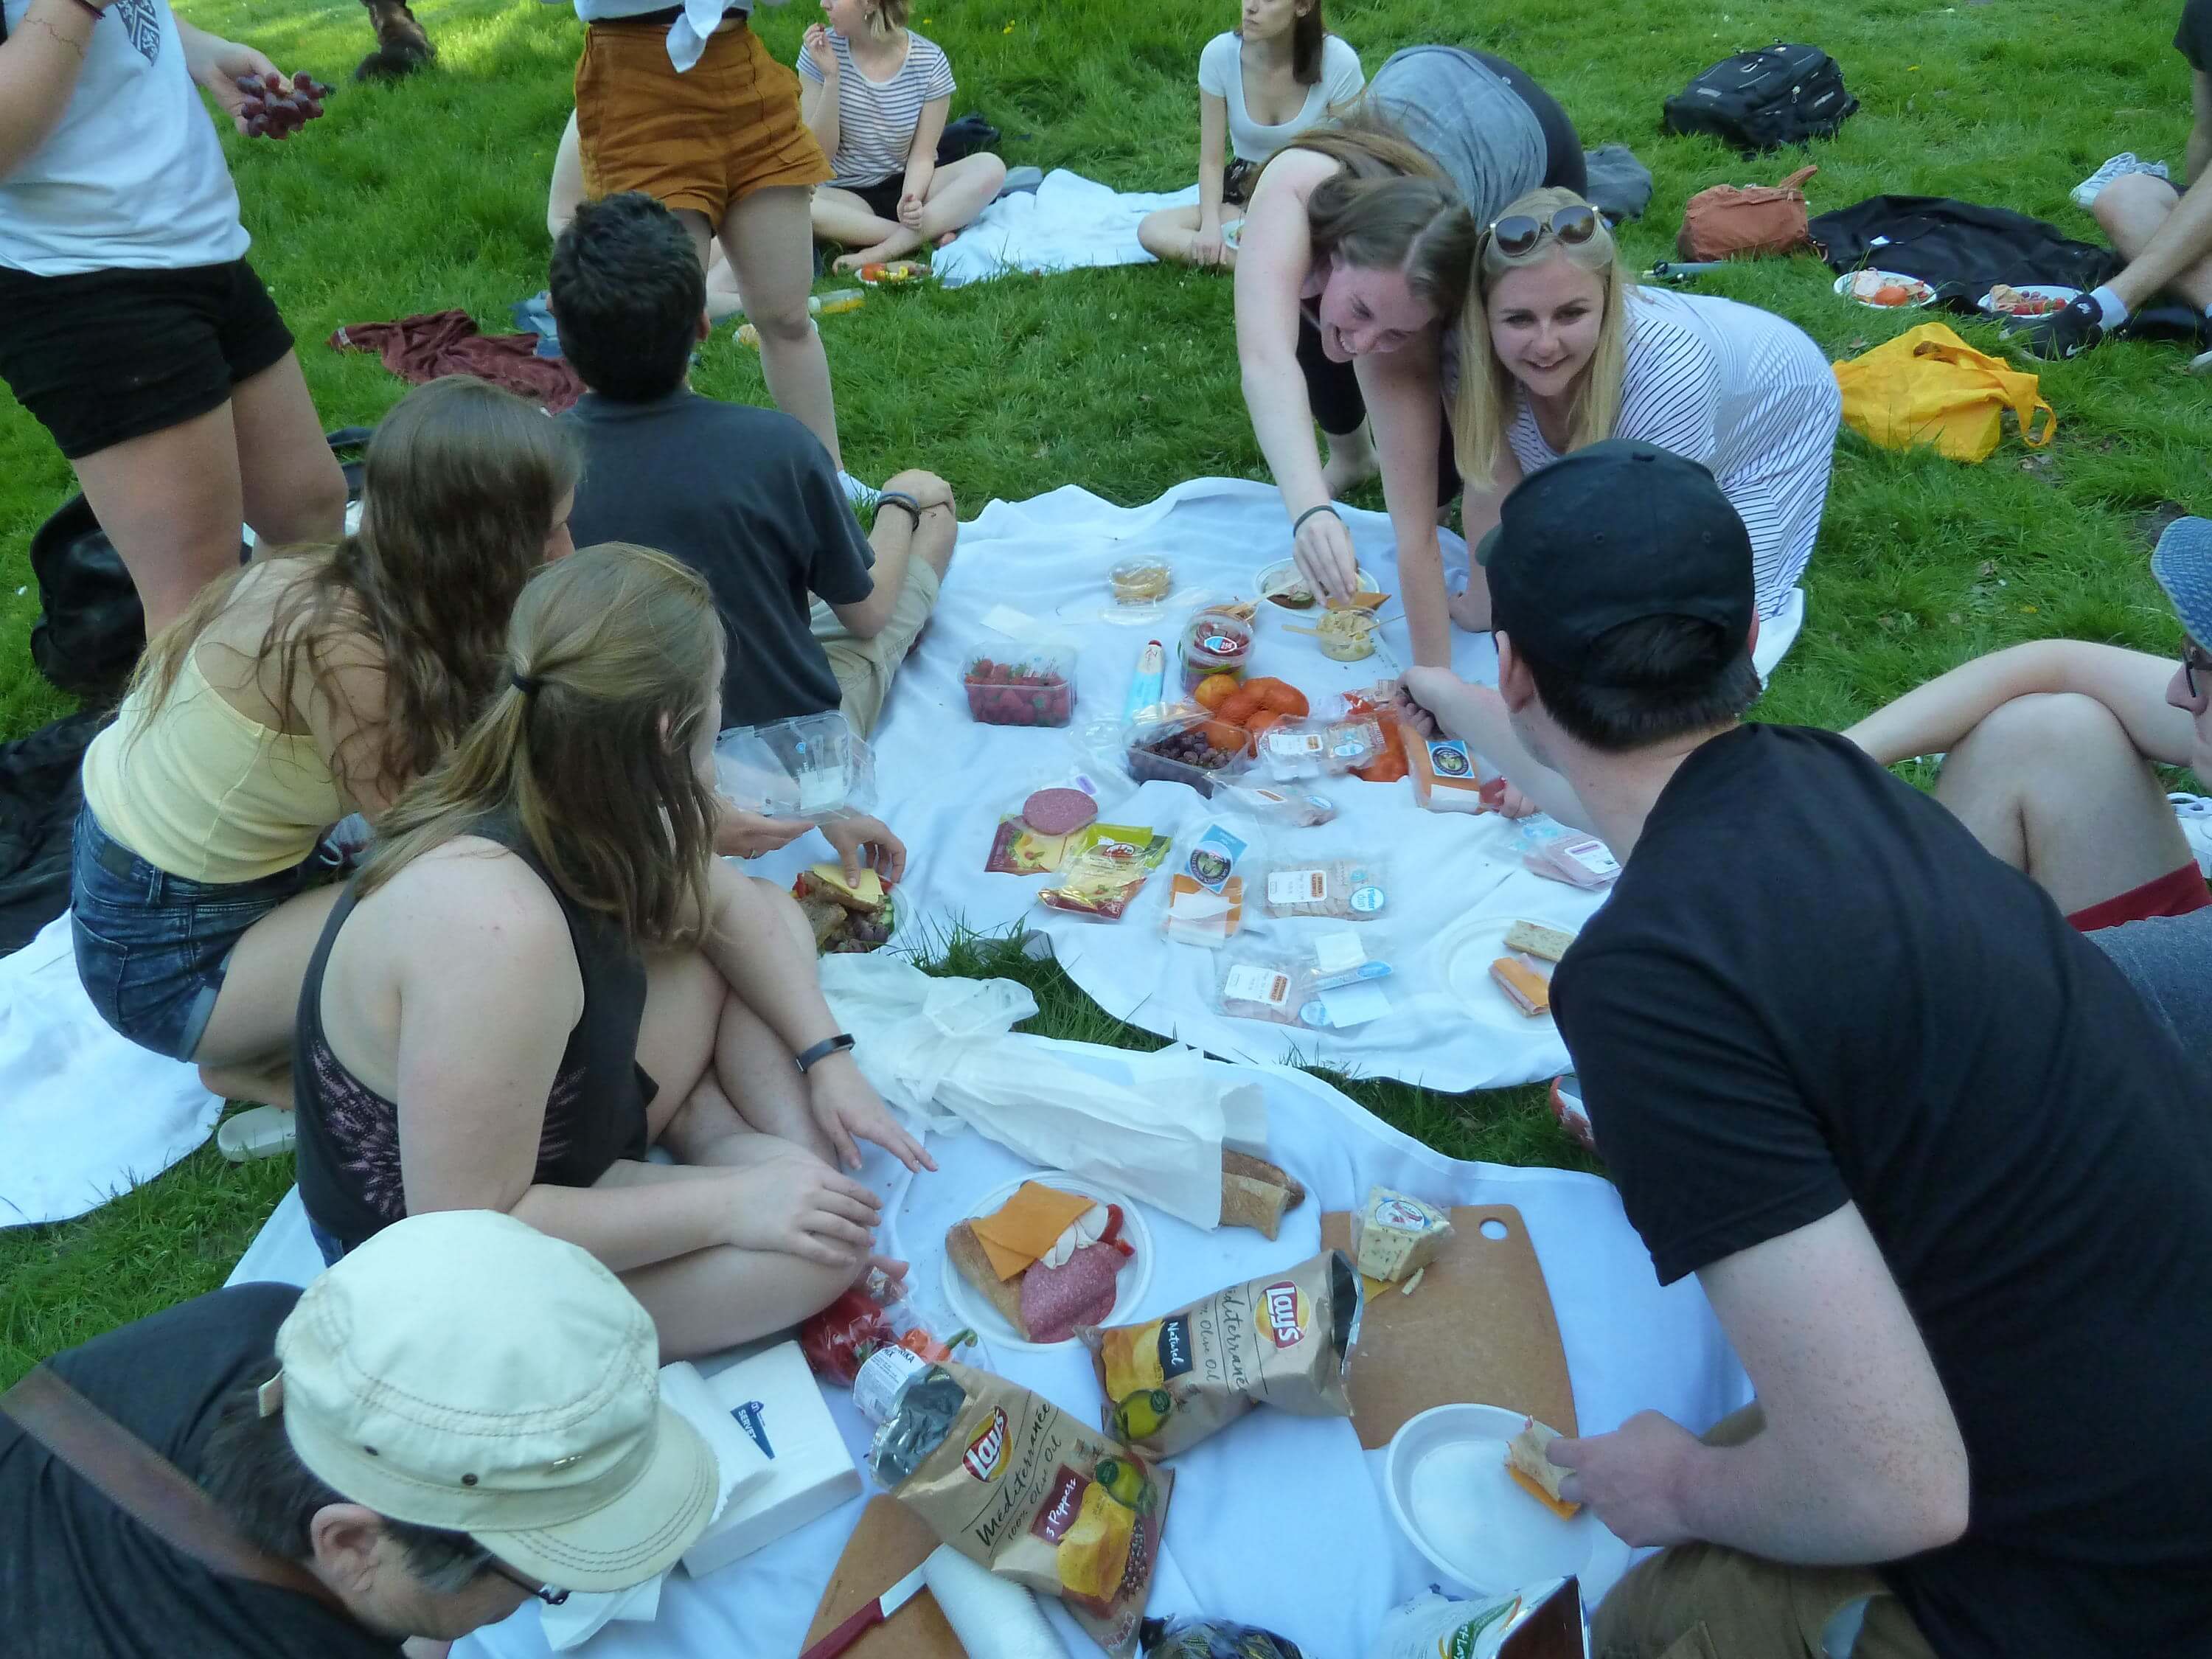 Students eating at a potluck picnic in the park